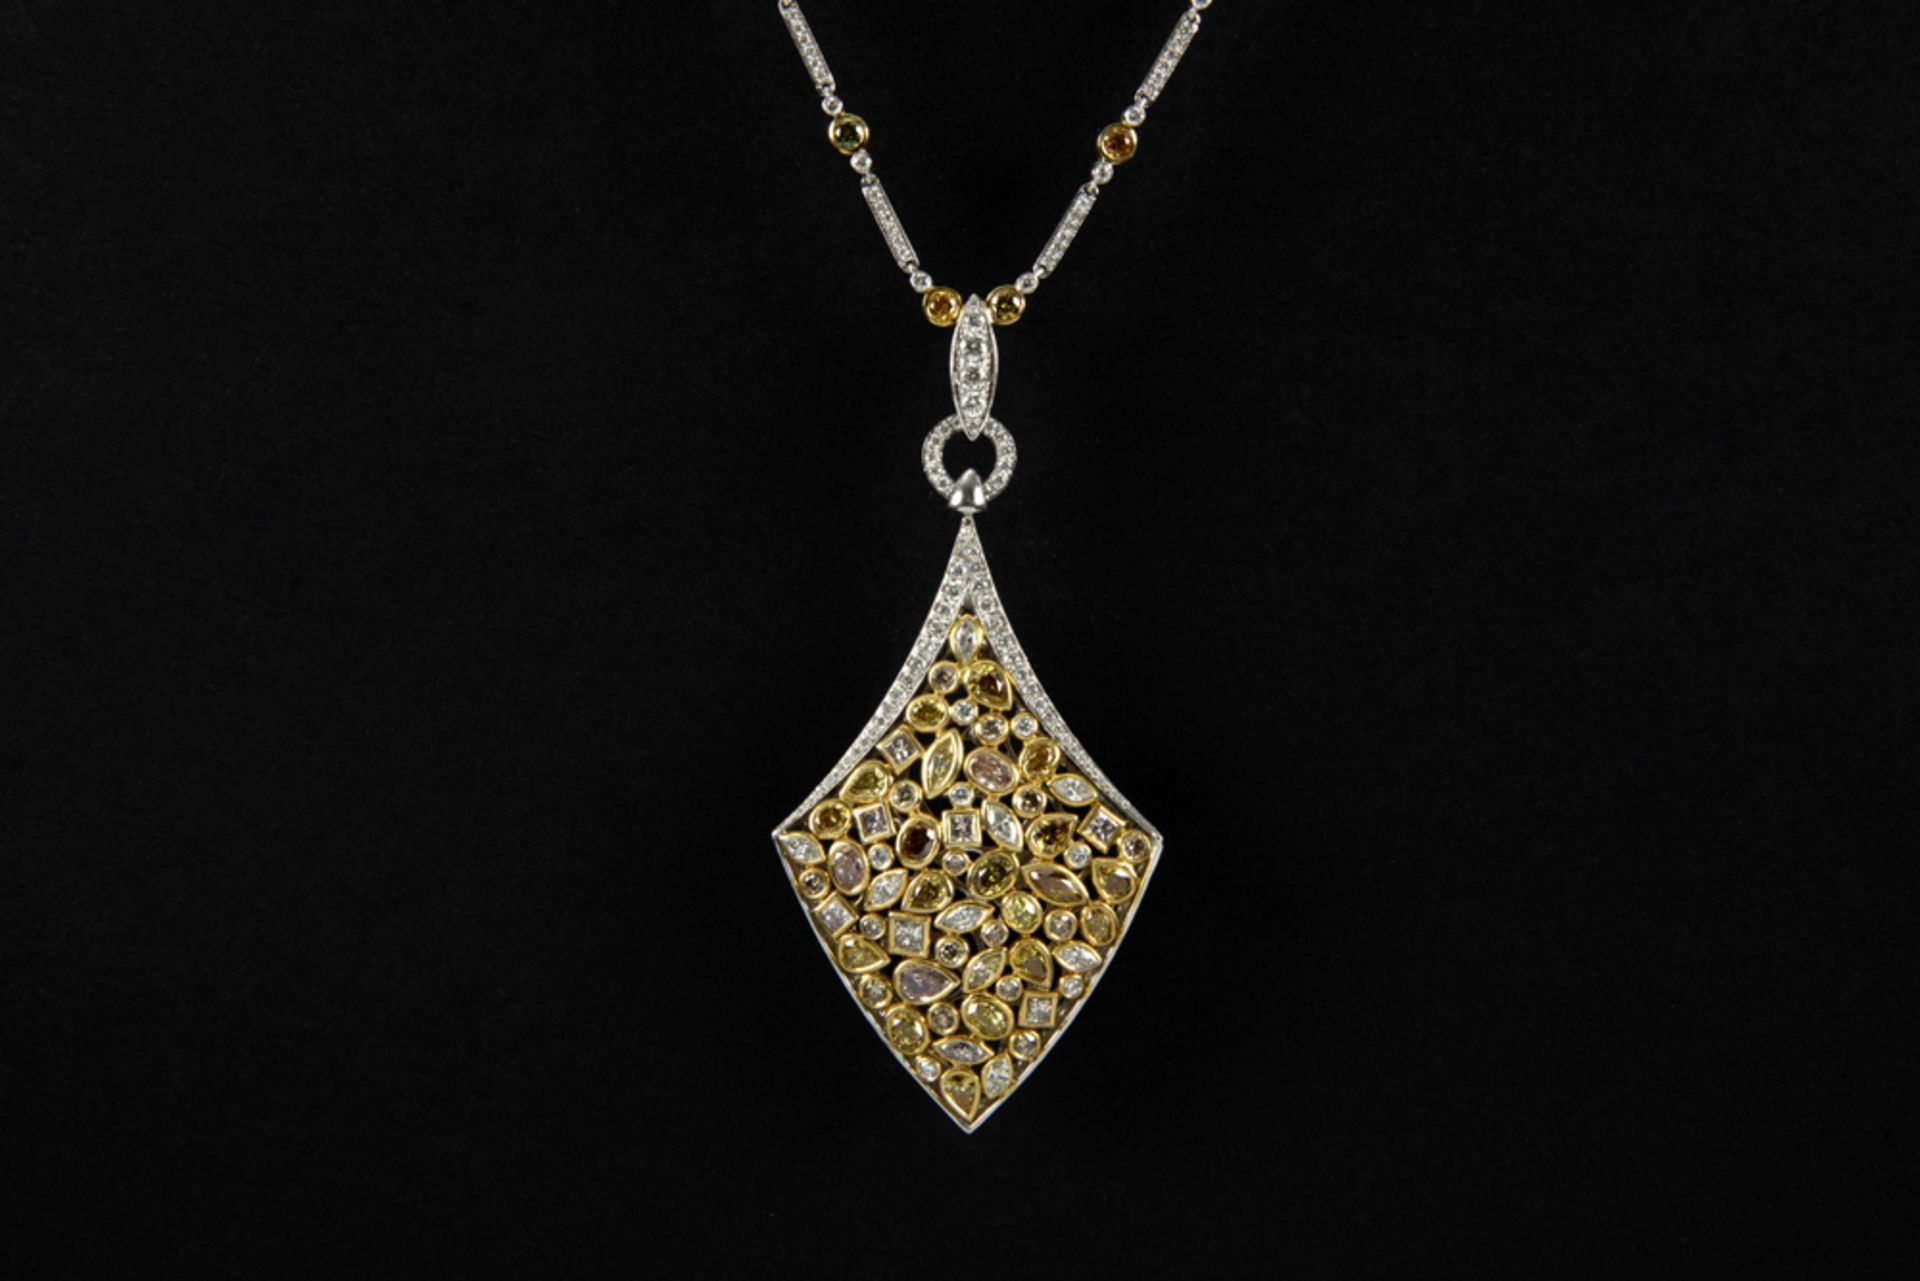 superb pendant with its necklace in yellow and white gold (18 carat) with ca 12 carat of white (G)